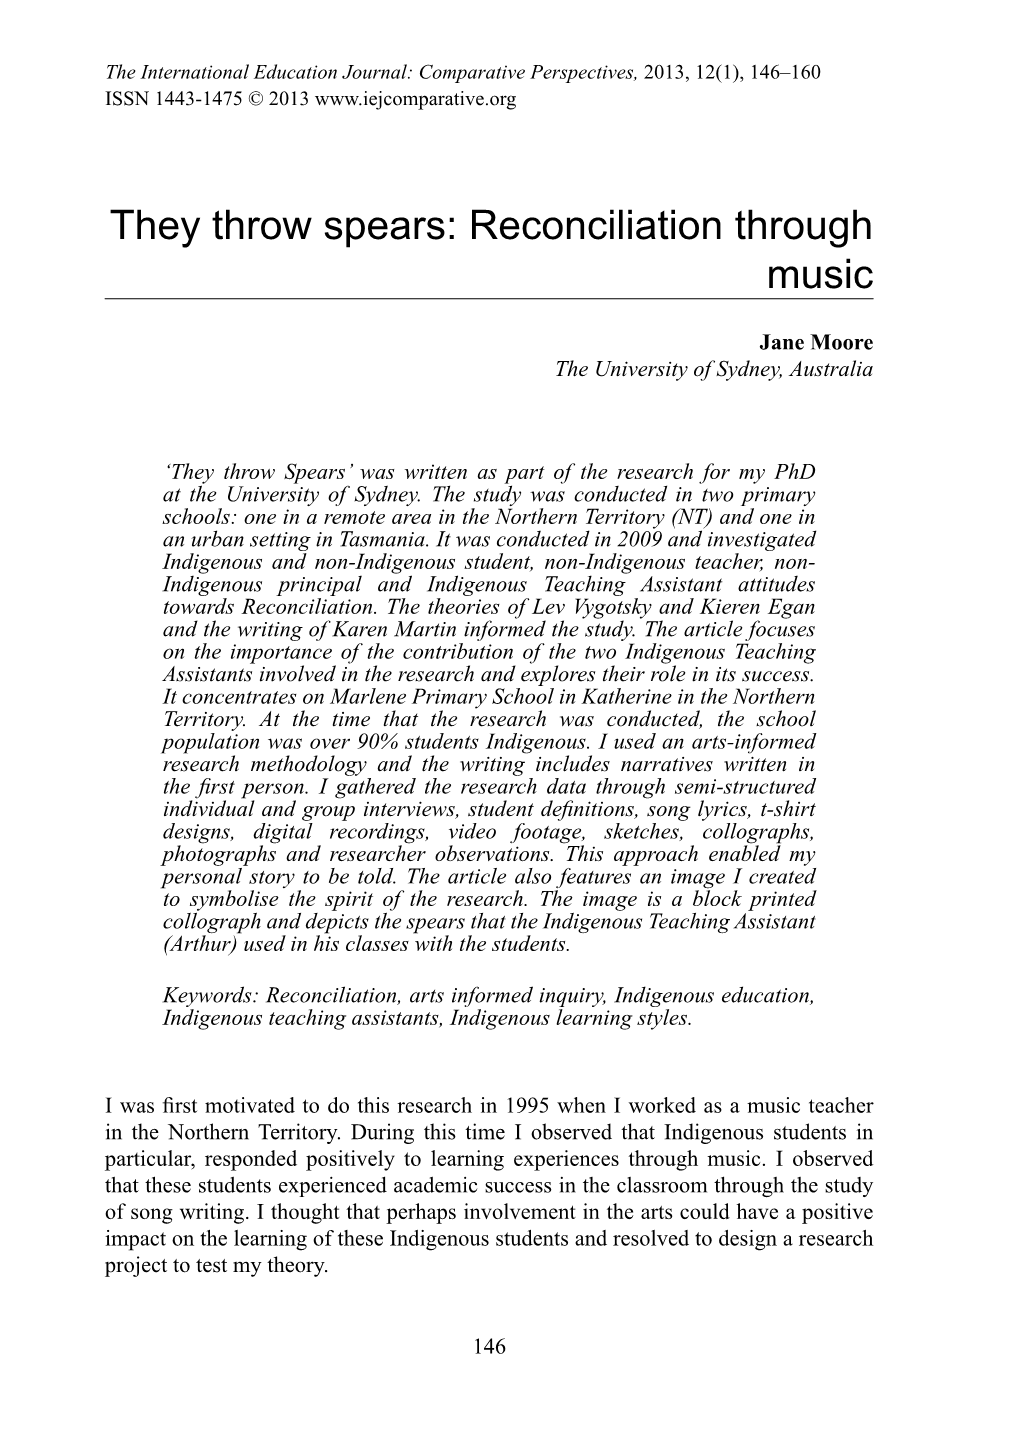 They Throw Spears: Reconciliation Through Music